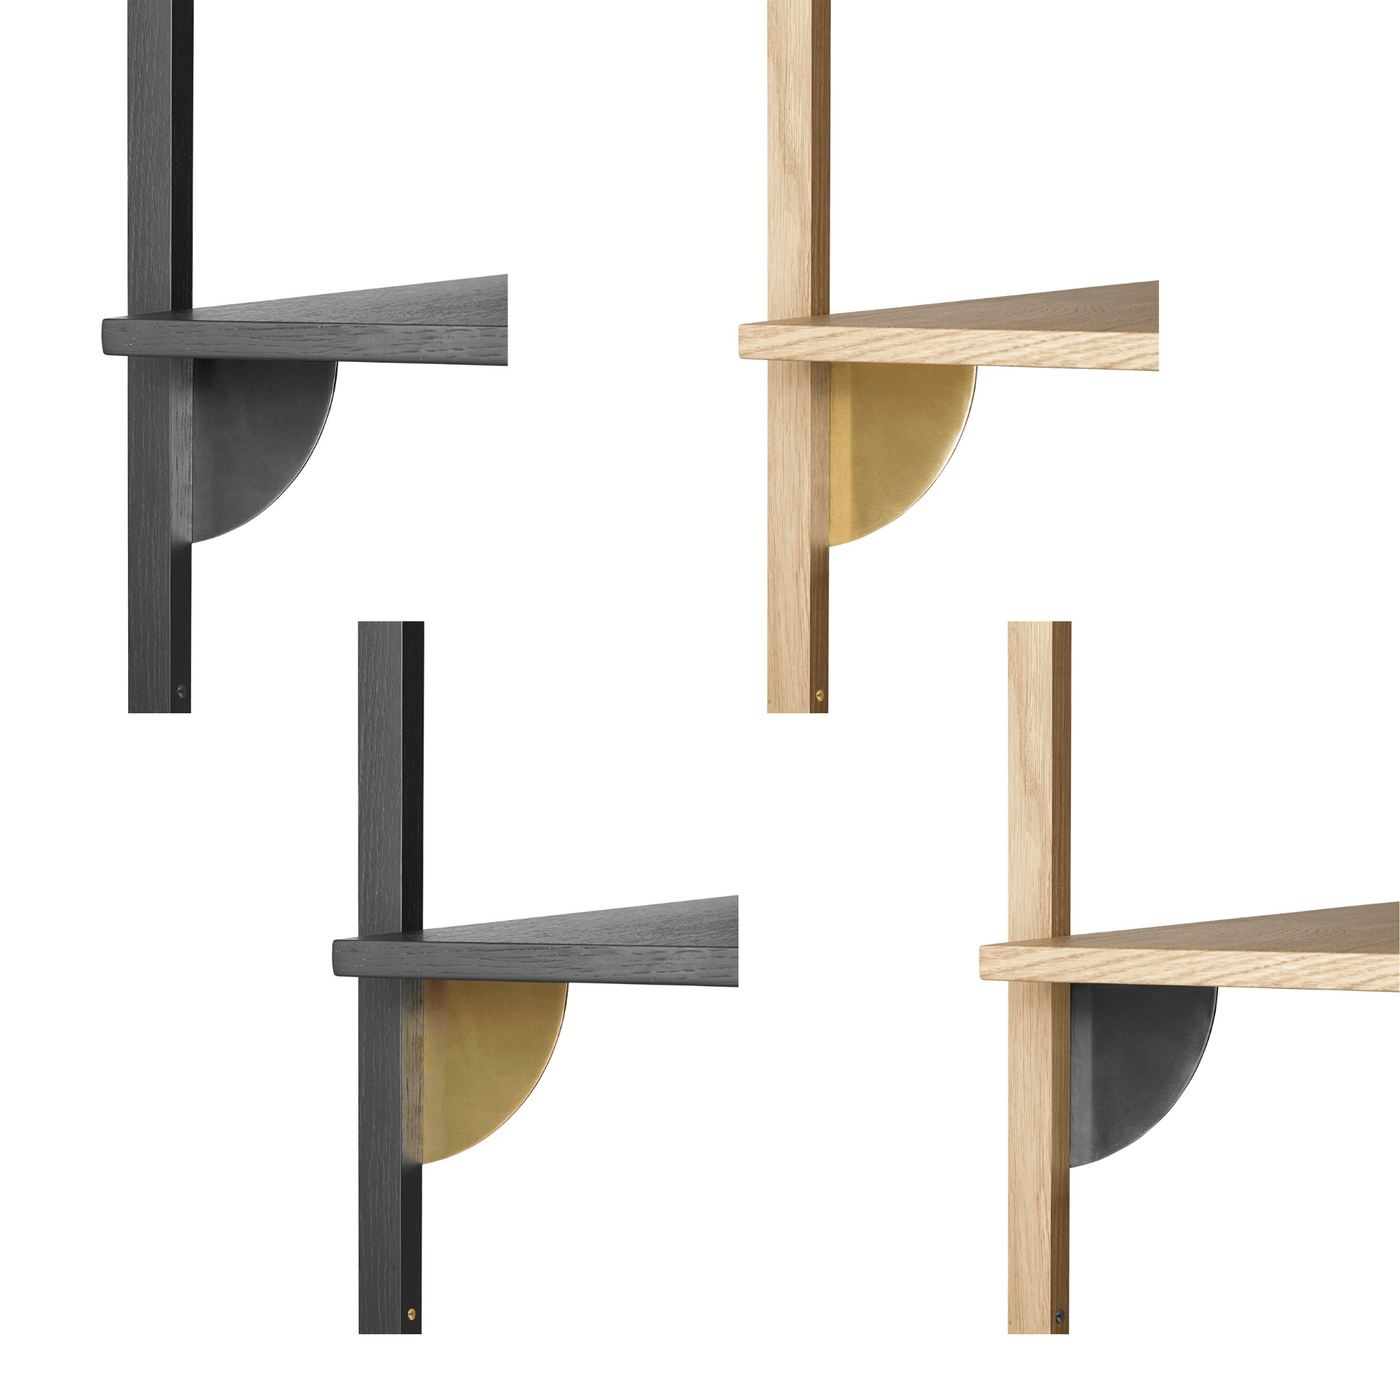 Ferm Living Sector Shelf series with polished brass or blackened brass brackets. Available from someday designs.